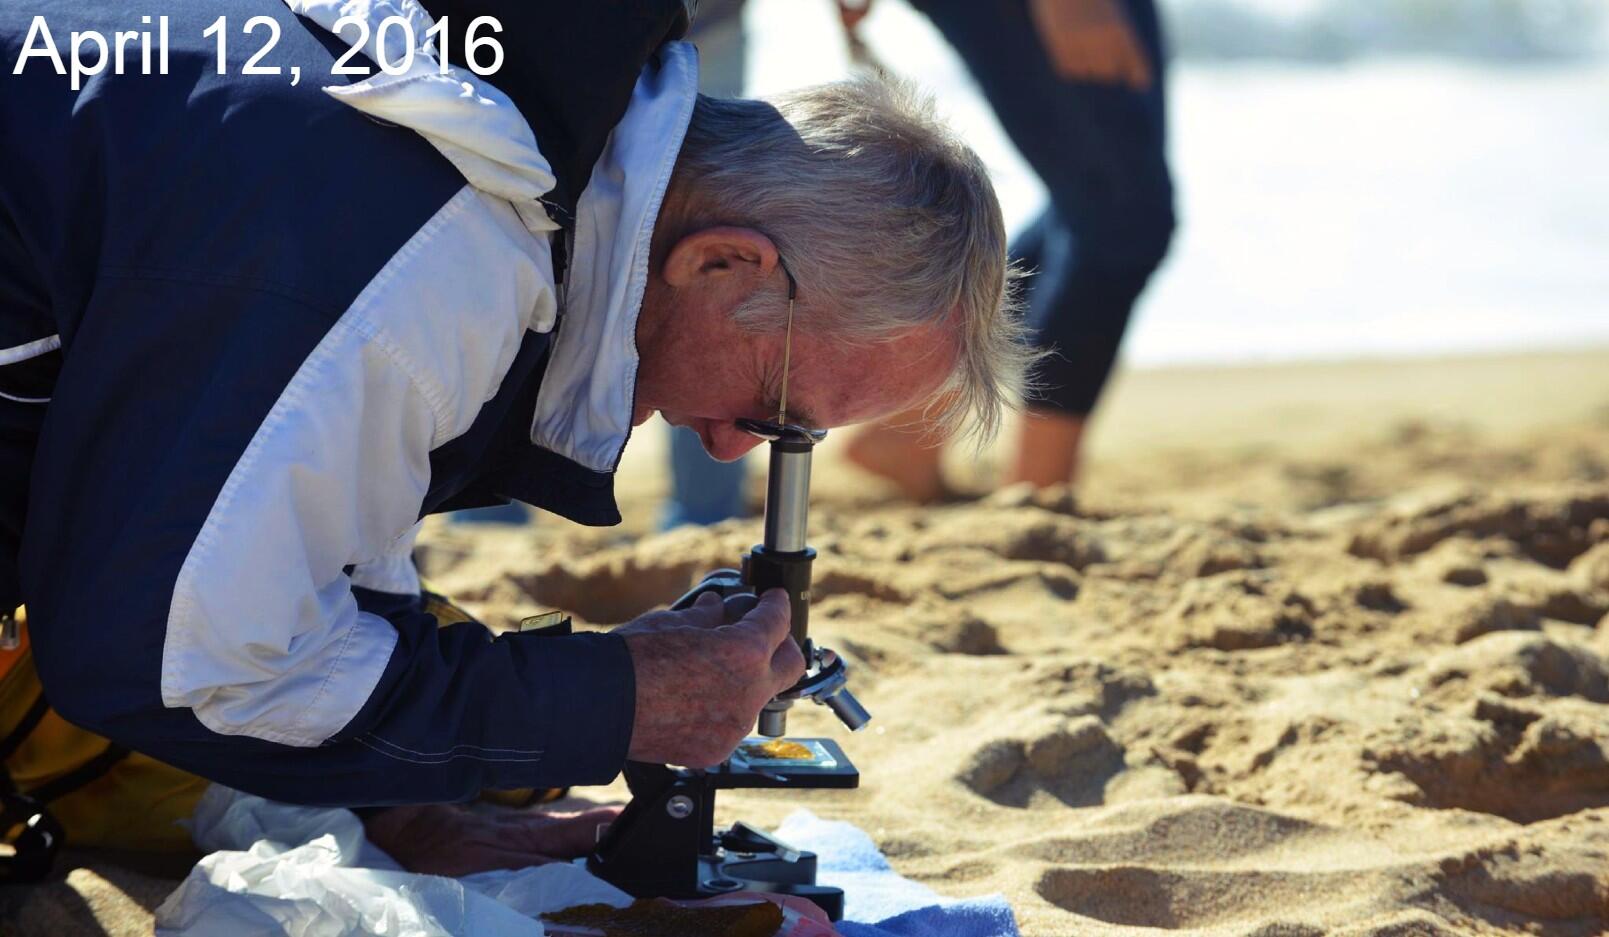 Mr. Osborne doing some science in the sand. 